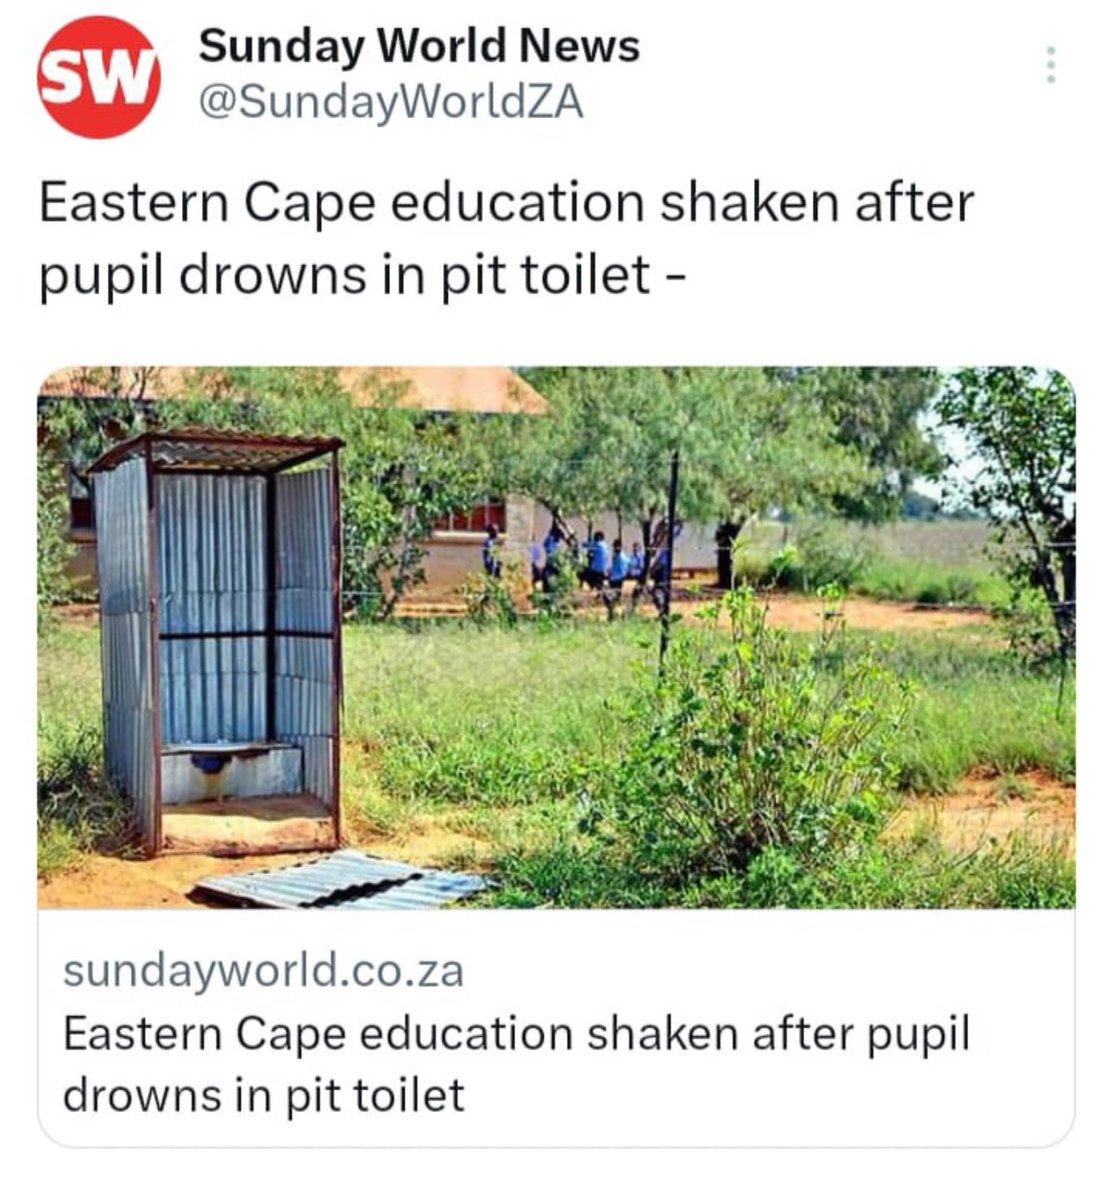 And the EC people will still vote ANC which cannot build mere proper and safe pit-toilets. One day their children will ask them difficult questions.